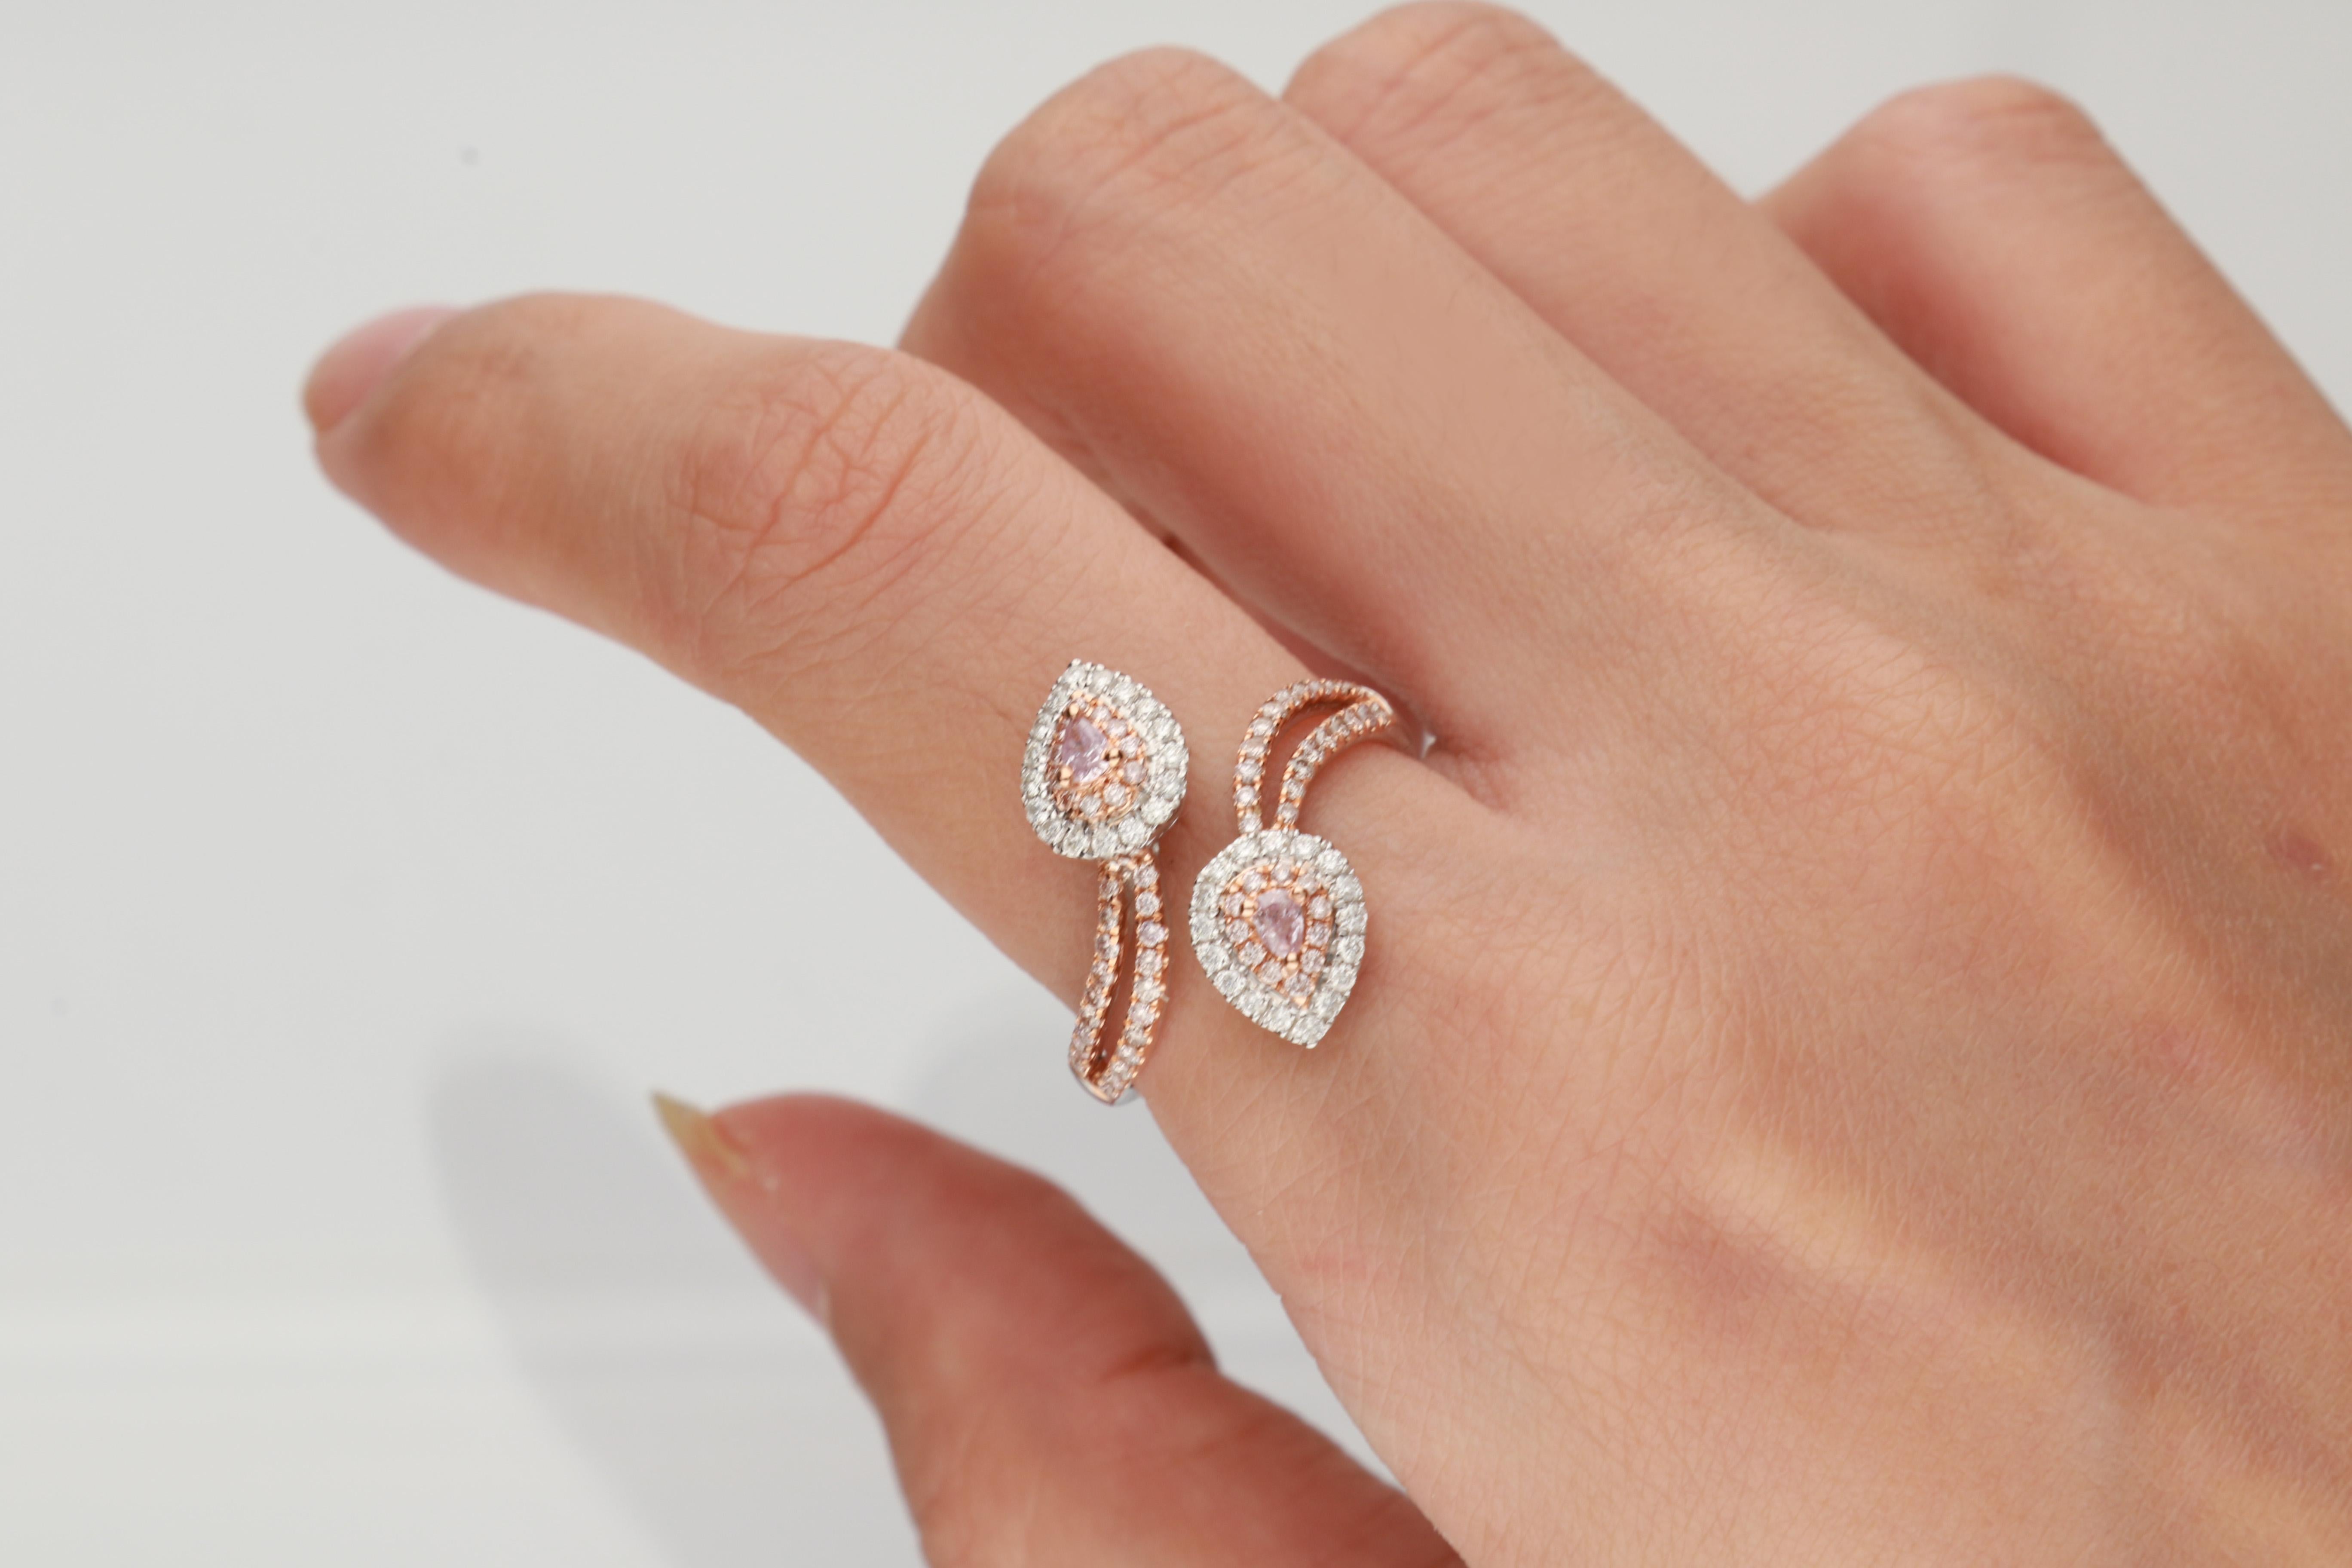 This beautiful Ring is crafted in 18-karat Triple Tone Gold and features an 64 Pcs Round Cut  0.45 Carat Pink Diamond. This ring also features 34 Pcs White Round diamonds 0.21 carat  in GH-SI quality. 
This ring comes in size 7 and can be resized to